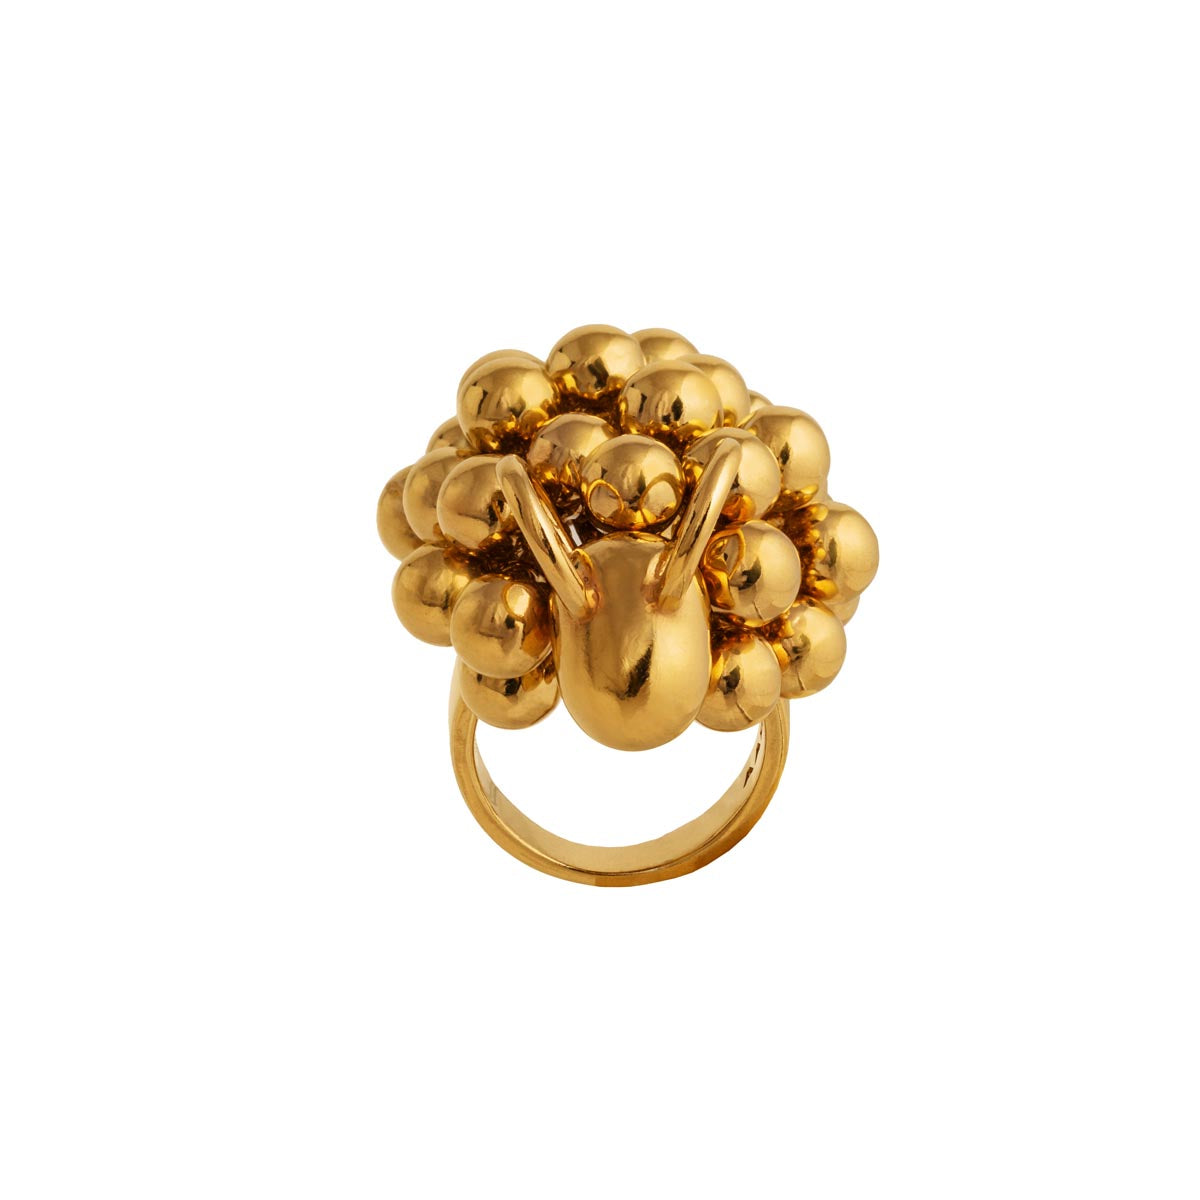 Pässi ring, gold-plated silver